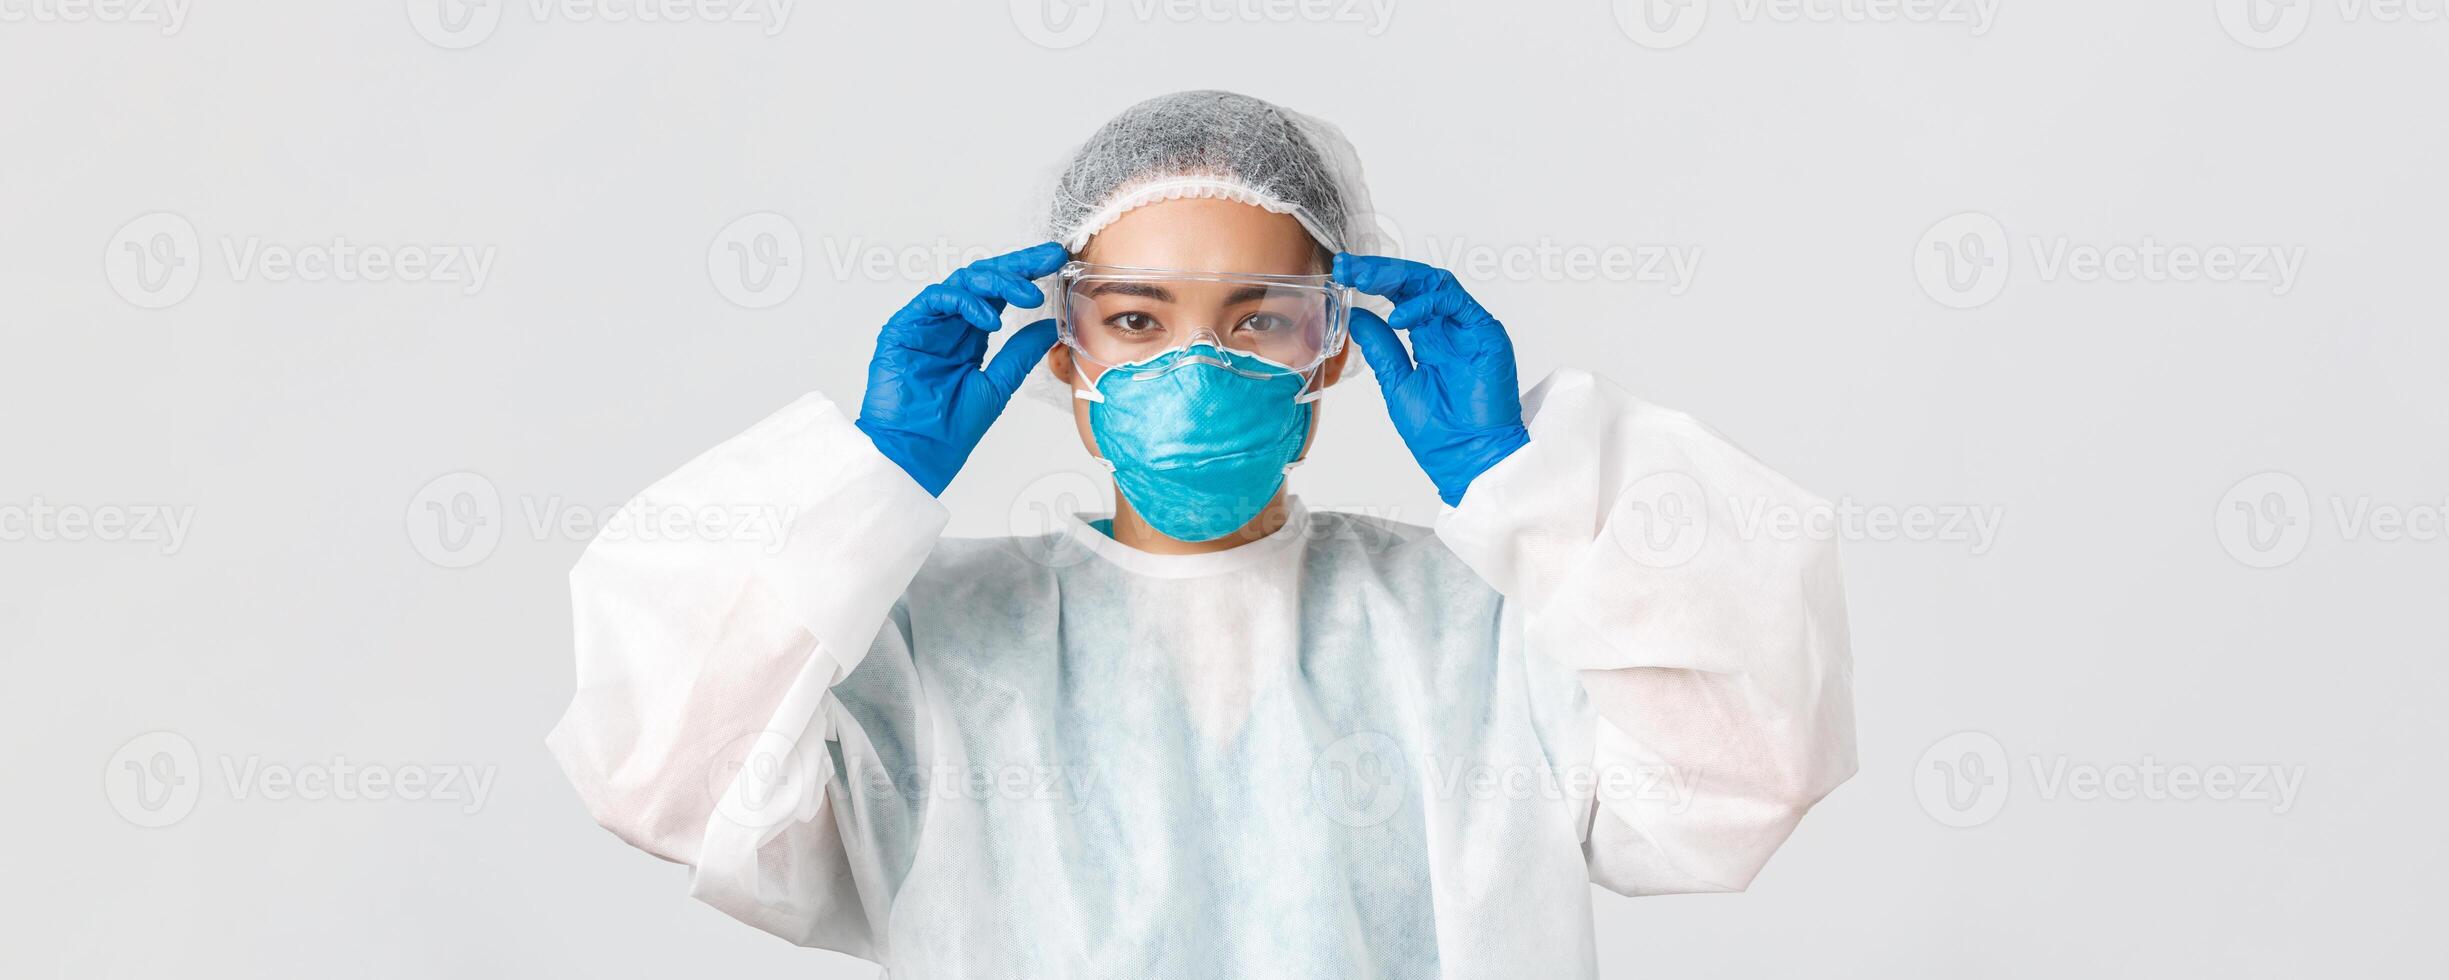 Covid-19, coronavirus disease, healthcare workers concept. Serious-looking asian female doctor in personal protective equipment, put on glass before entering lab, white background photo